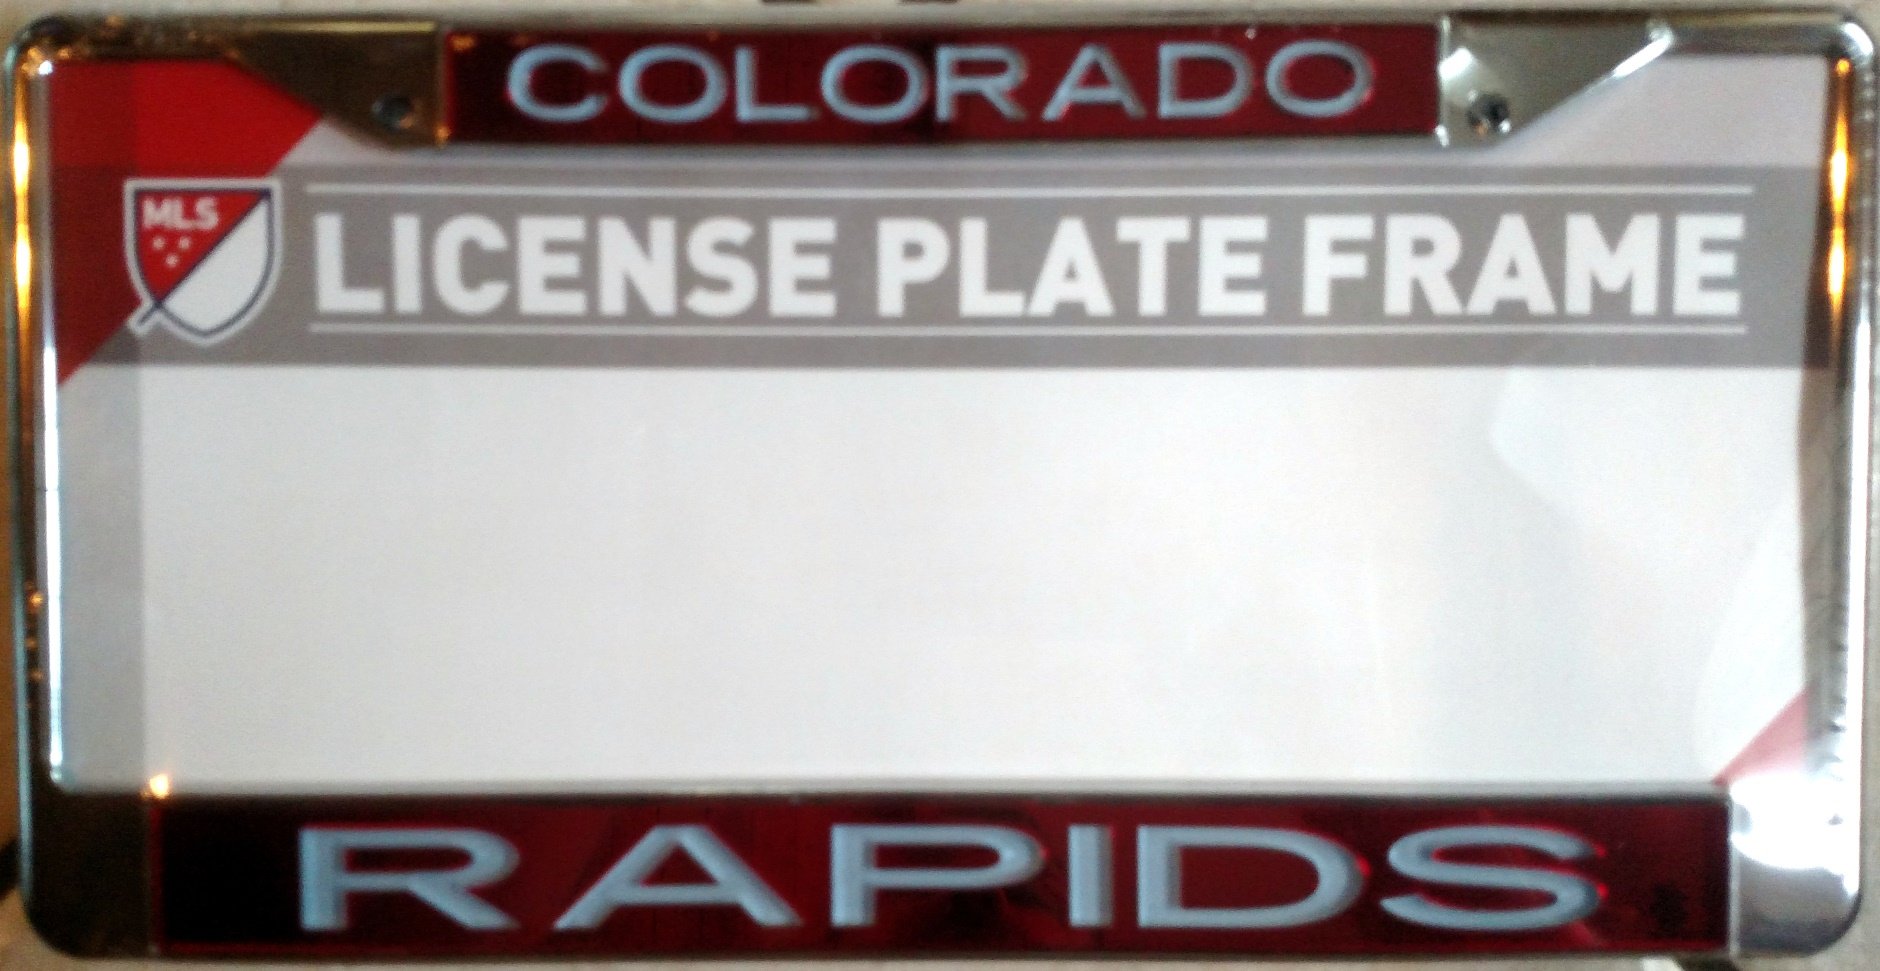 Colorado Rapids MLS Chrome Metal License Plate Frame Tag Cover, Laser Mirrored Inserts, 12x6 Inch